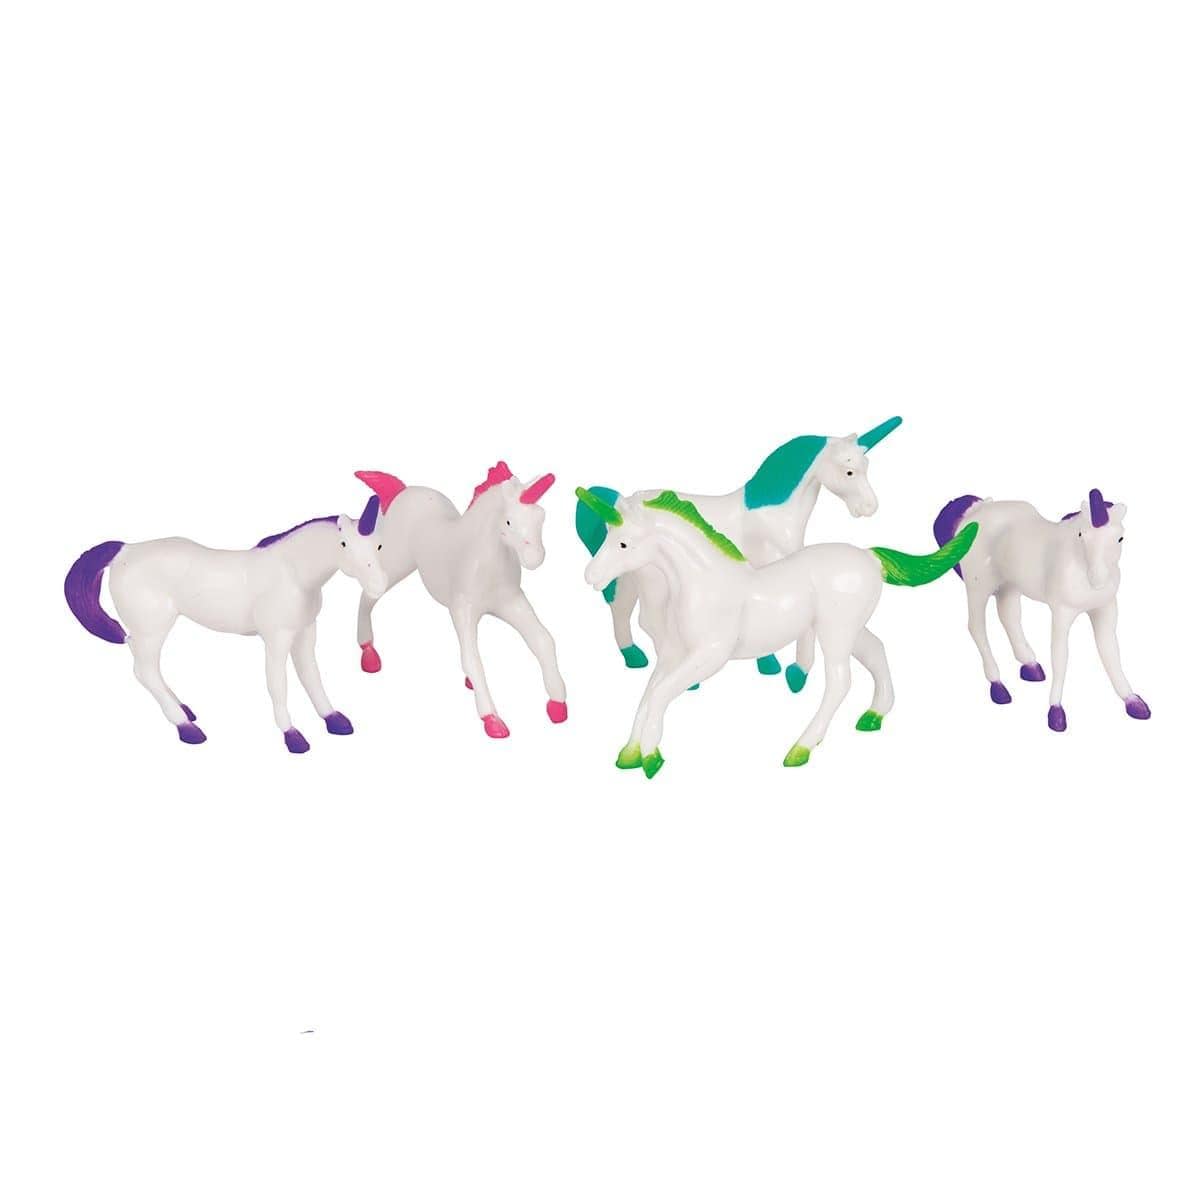 Buy Kids Birthday Plastic unicorn figurines, 8 per package sold at Party Expert